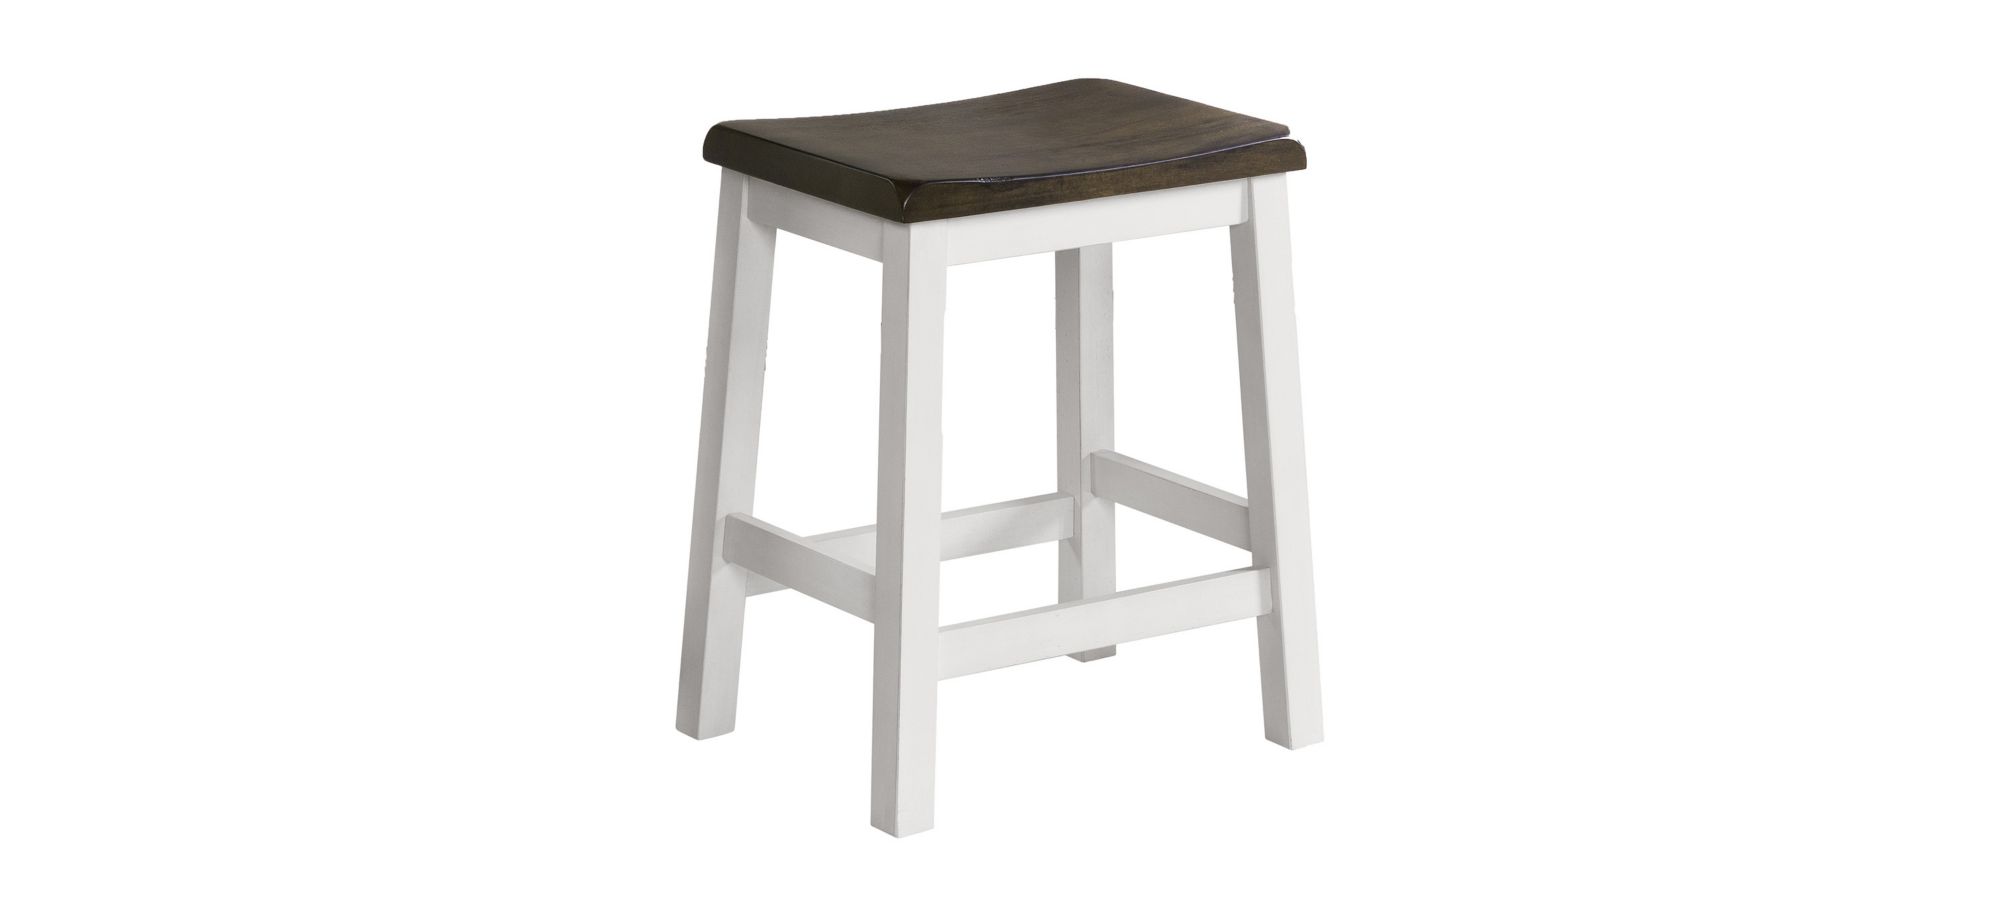 Kona Counter Stool in Gray and White finish by Intercon